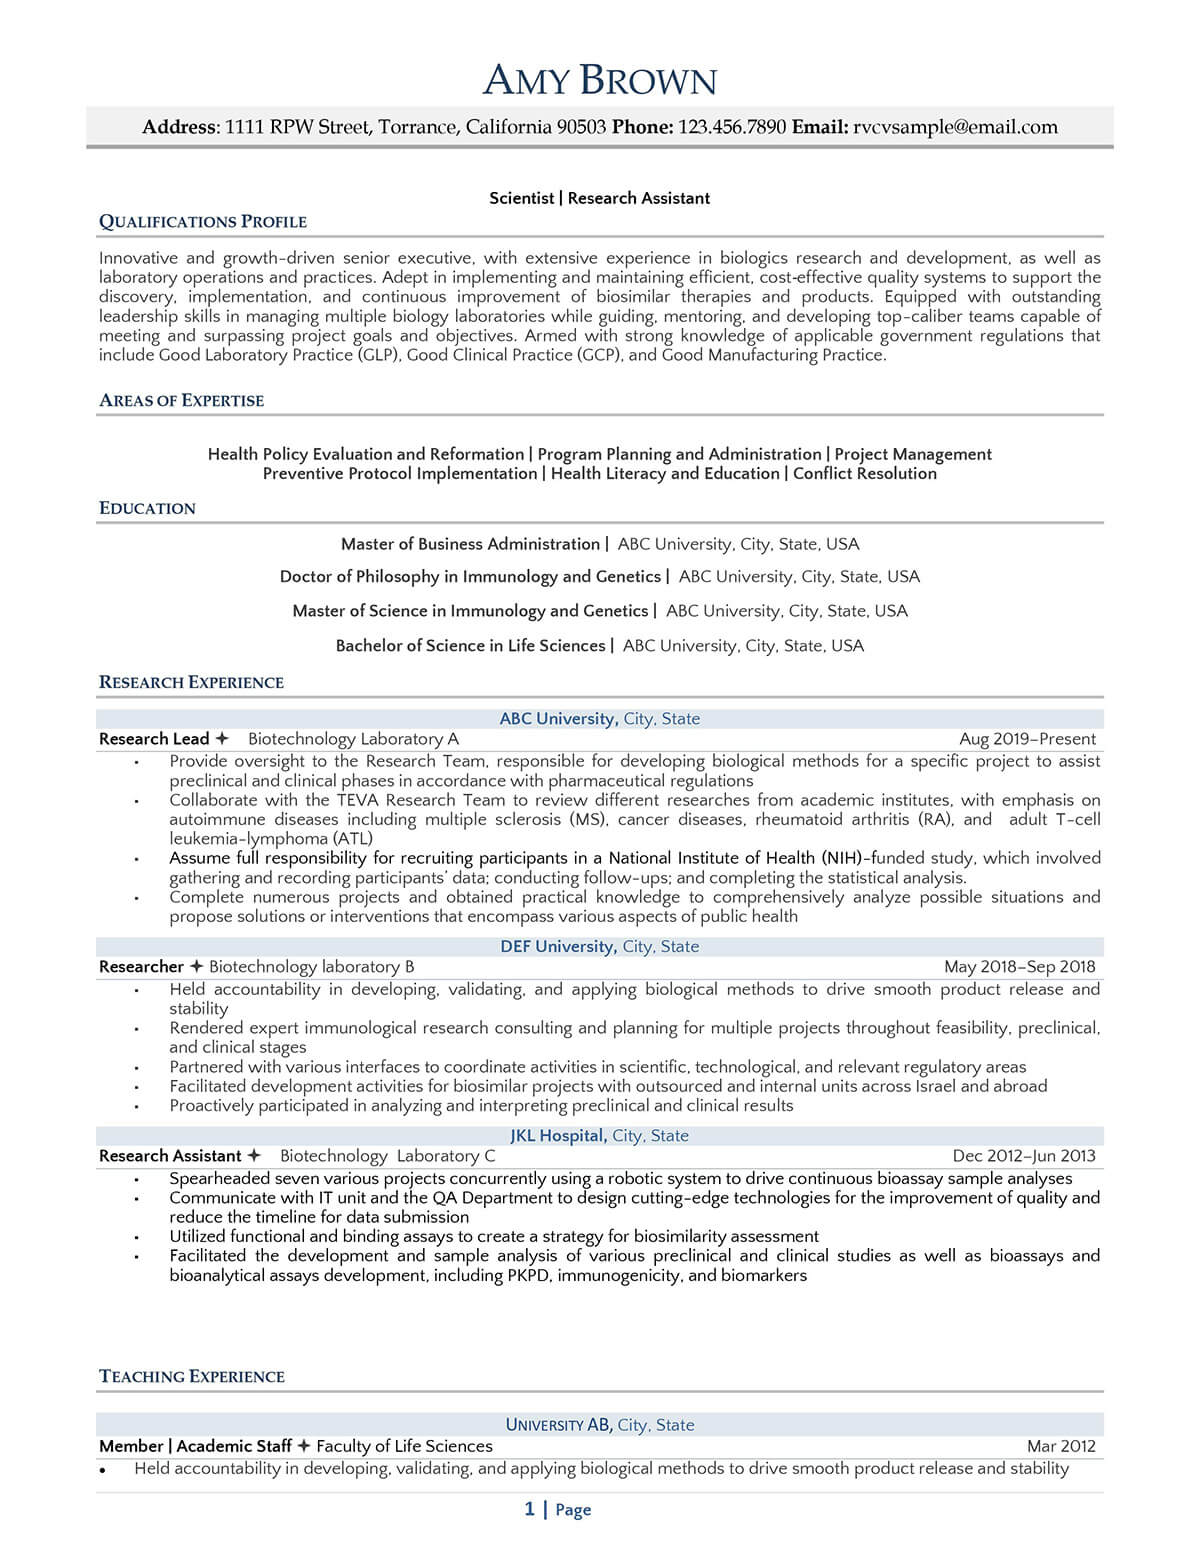 Resume Valley CV example page one